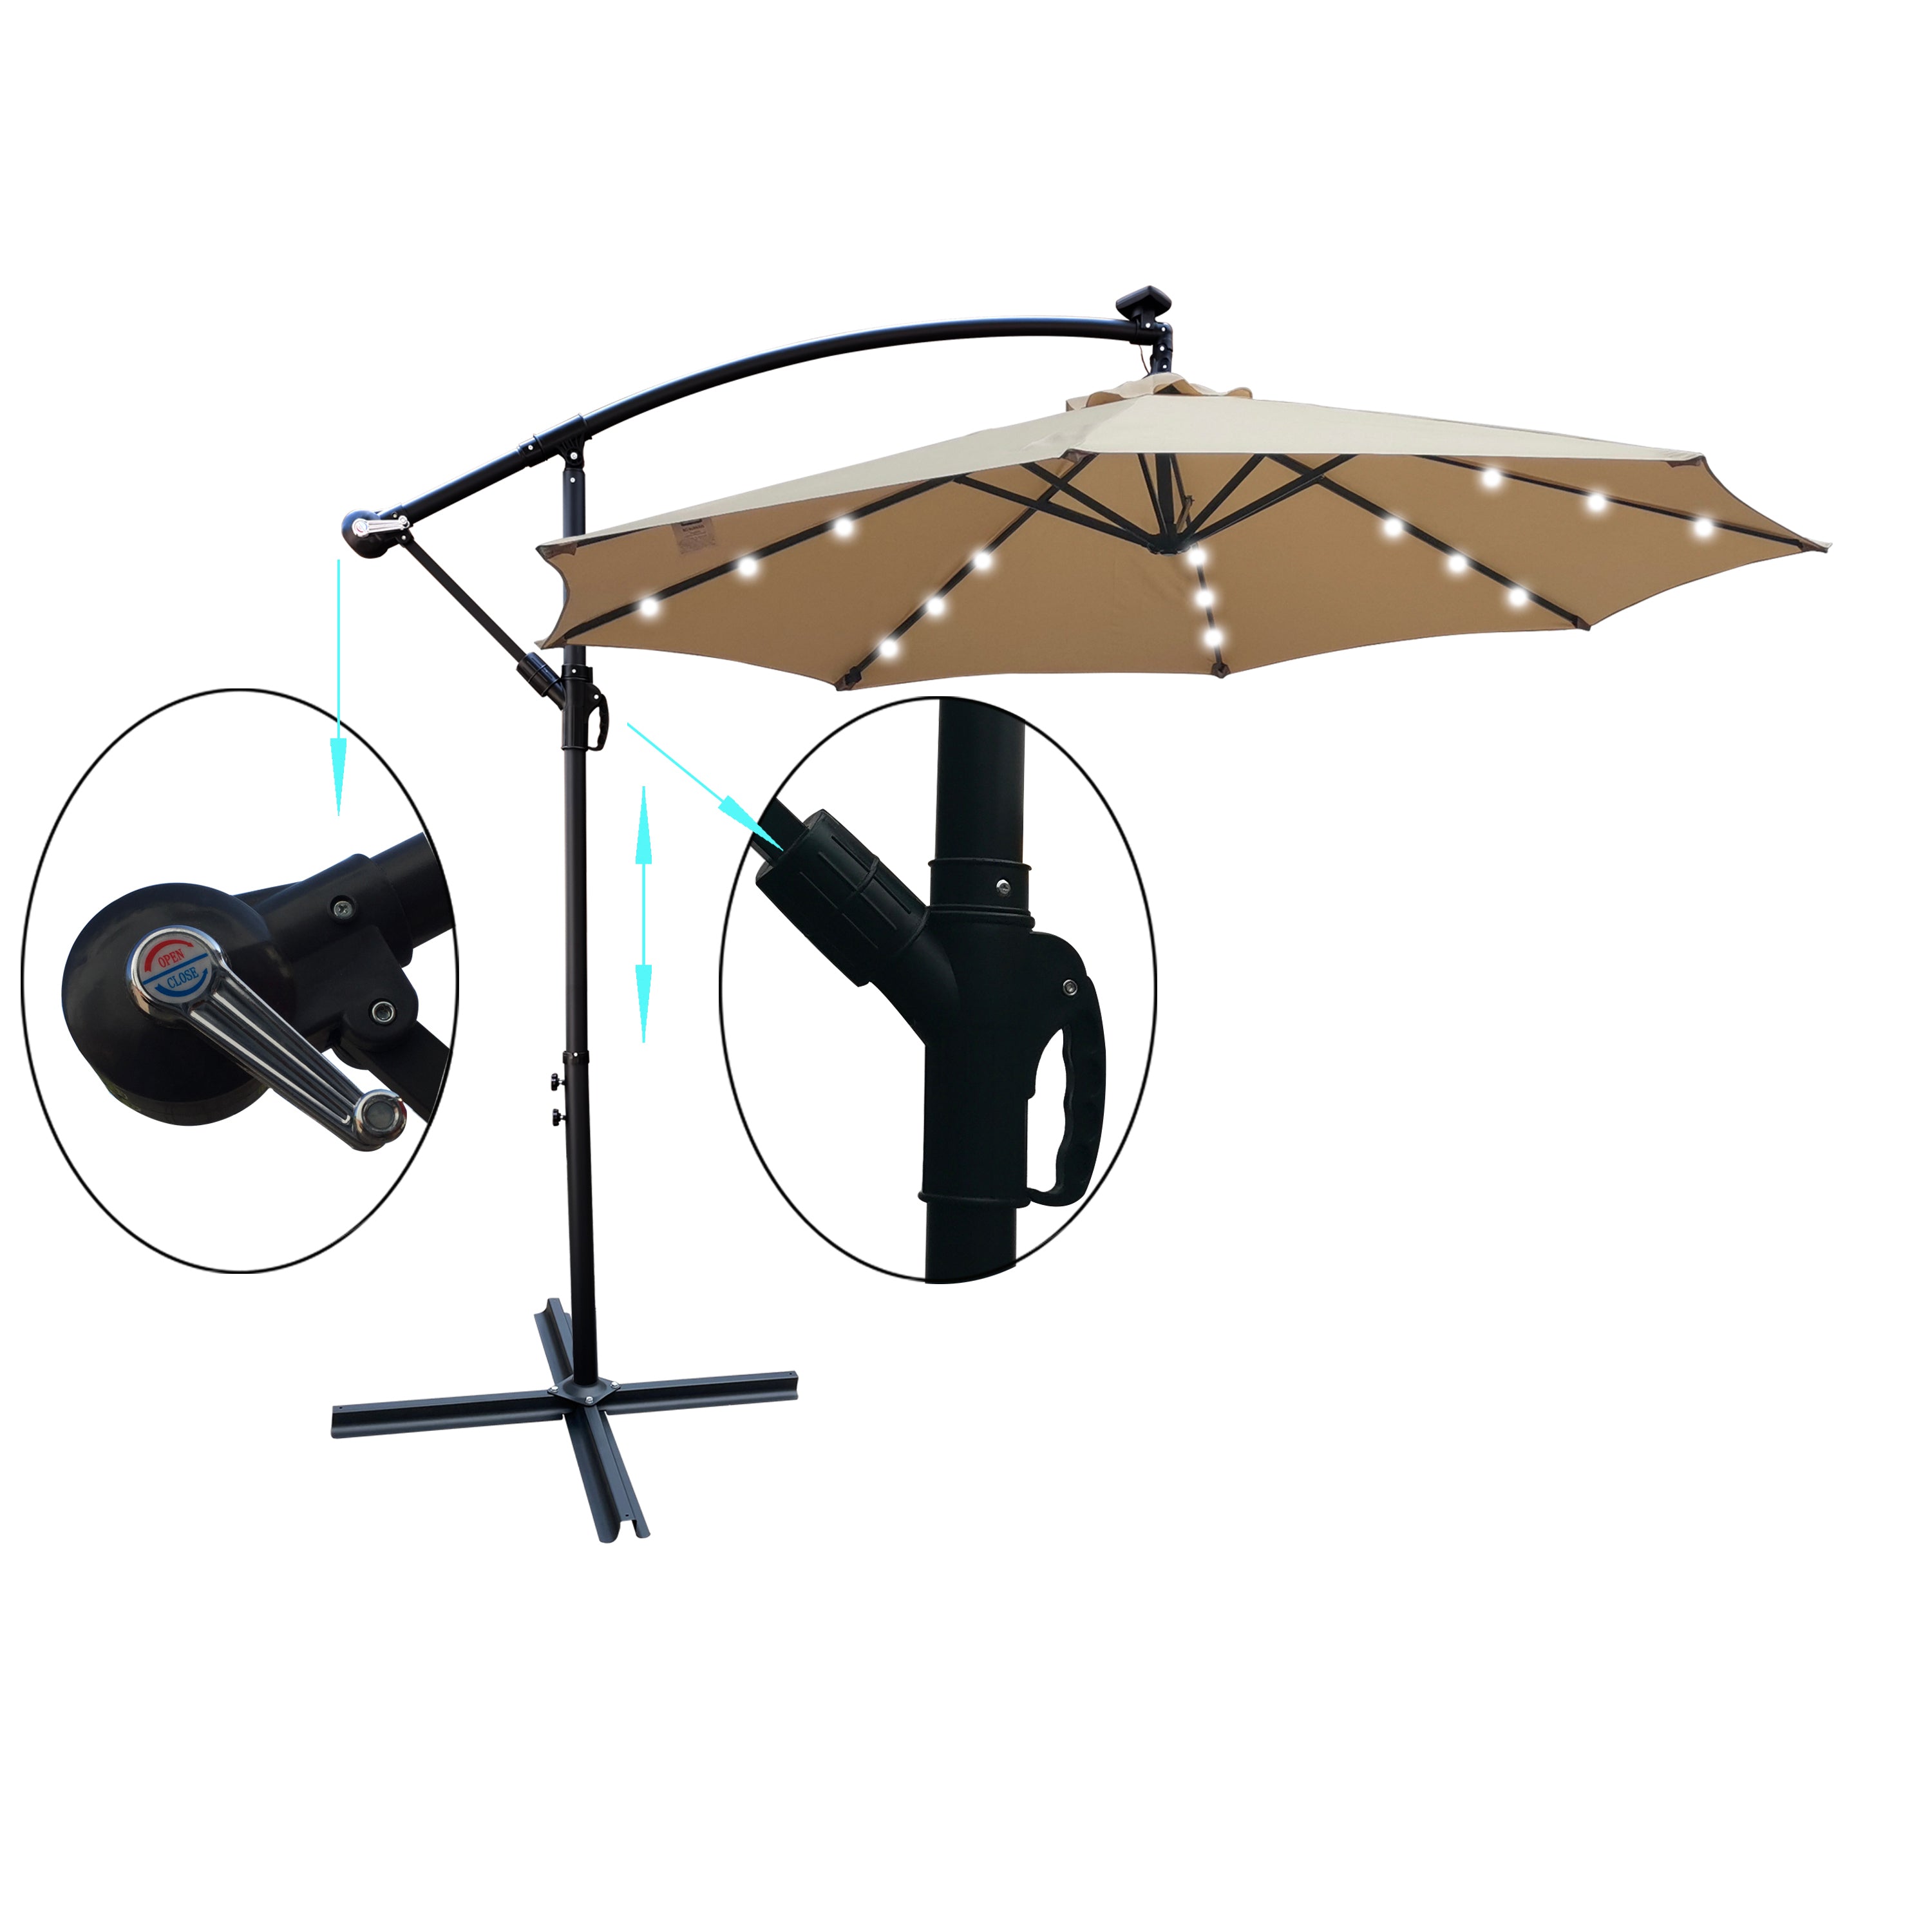 Tan 10 ft Outdoor Patio Umbrella Solar Powered LED Lighted Sun Shade Market Waterproof 8 Ribs Umbrella with Crank and Cross Base for Garden Deck Backyard Pool Shade Outside Deck Swimming Pool